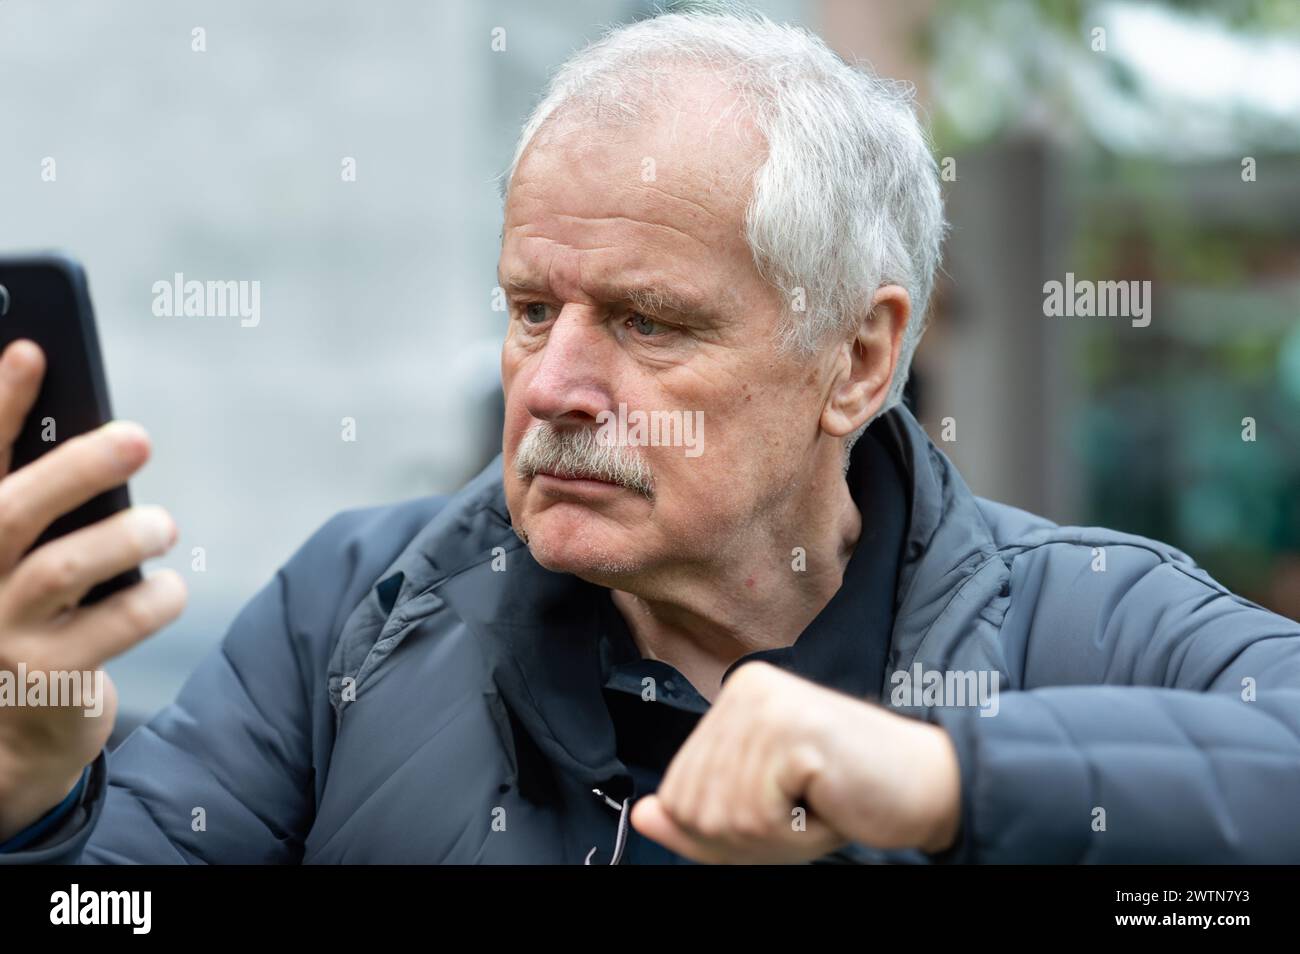 Senior man looking confused at mobile phone. Stock Photo